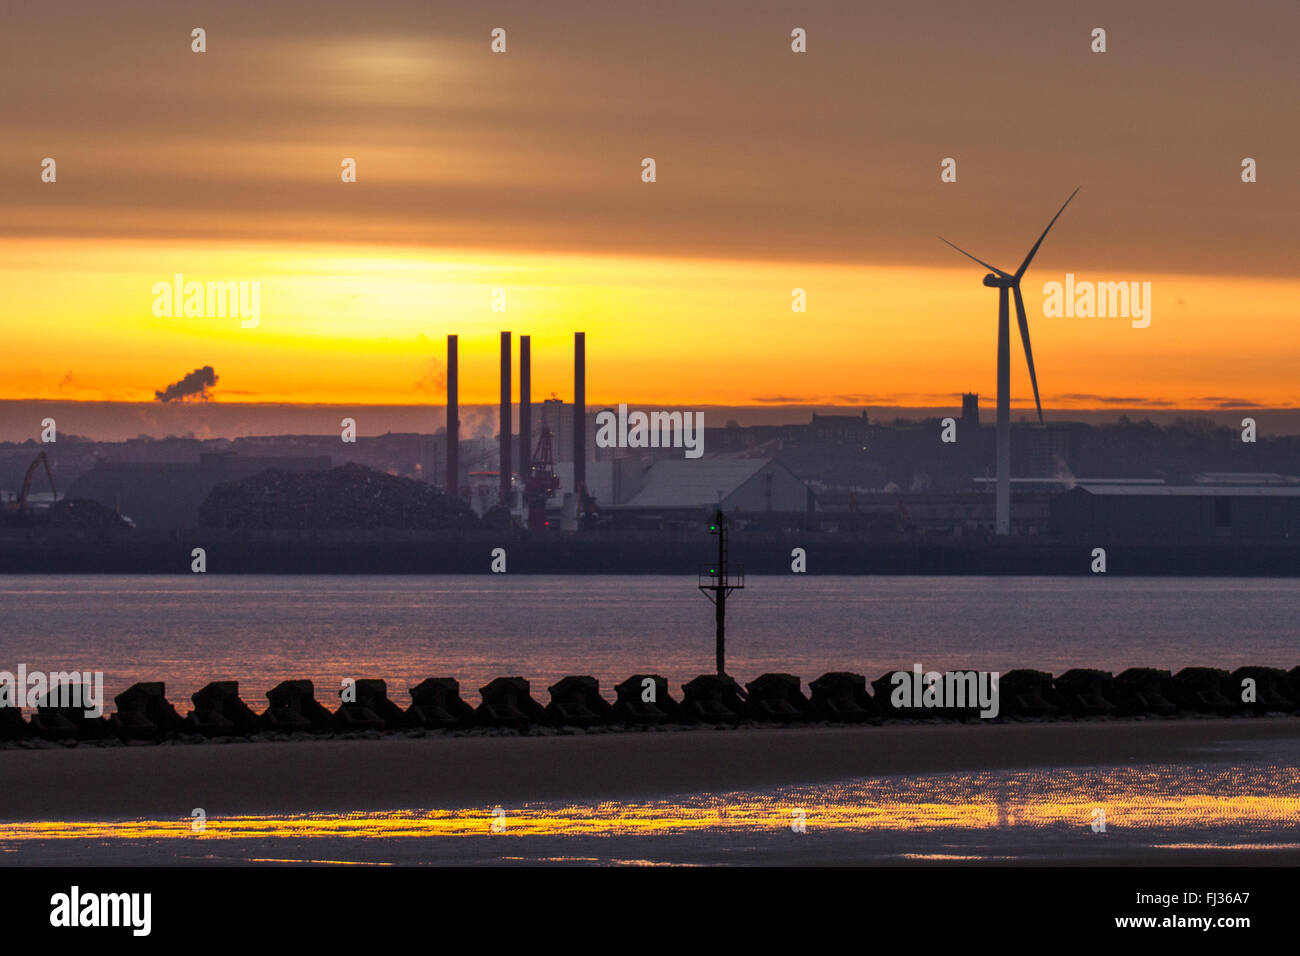 New Brighton, Wallasey.  29th February 2016. UK Weather. Sunrise over the River Mersey. New Brighton is a seaside resort forming part of the town of Wallasey, in the Metropolitan Borough of Wirral, in the metropolitan county of Merseyside, England. It is located at the northeastern tip of the Wirral Peninsula, within the historic county boundaries of Cheshire, and has sandy beaches which line the Irish Sea. New Brighton is home to the UK's longest promenade at 3.5 kilometres. Stock Photo